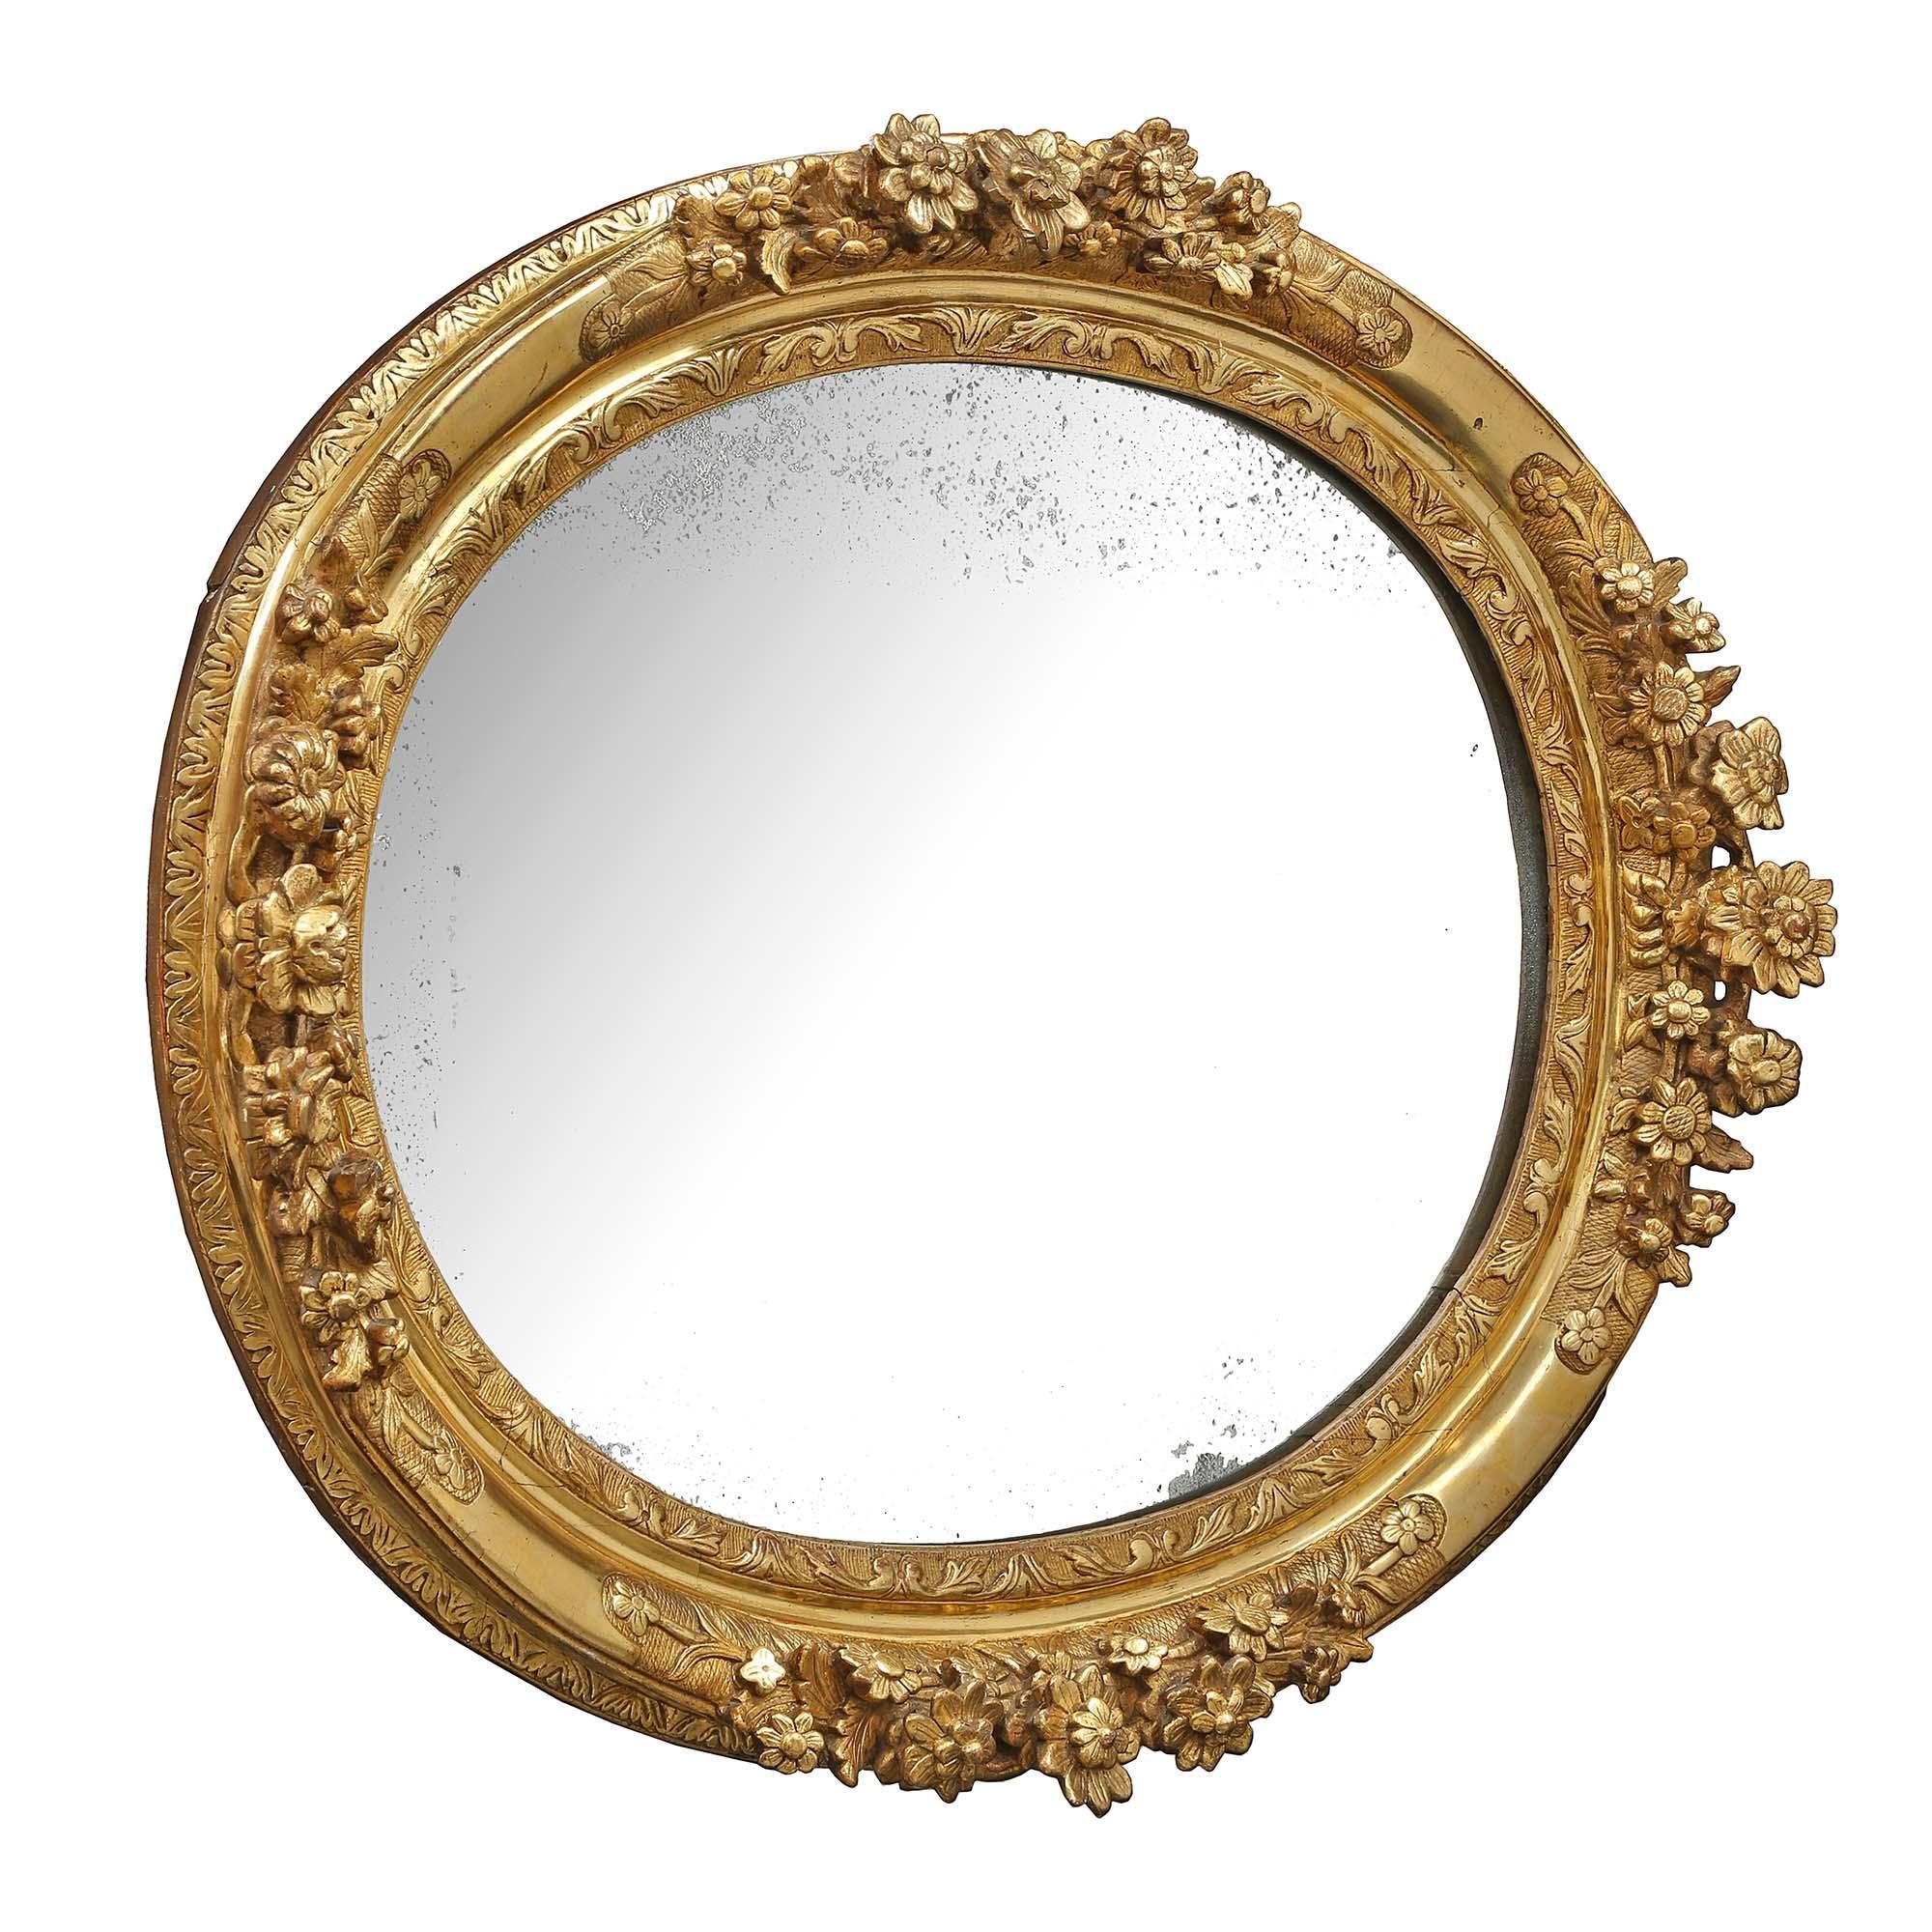 A stunning French early 18th century Louis XIV Period finely carved giltwood mirror. This oval mirror has an interior scrolled designed border and large protruding carved foliate frame with acanthus leaf designed trim. With all original mirror plate